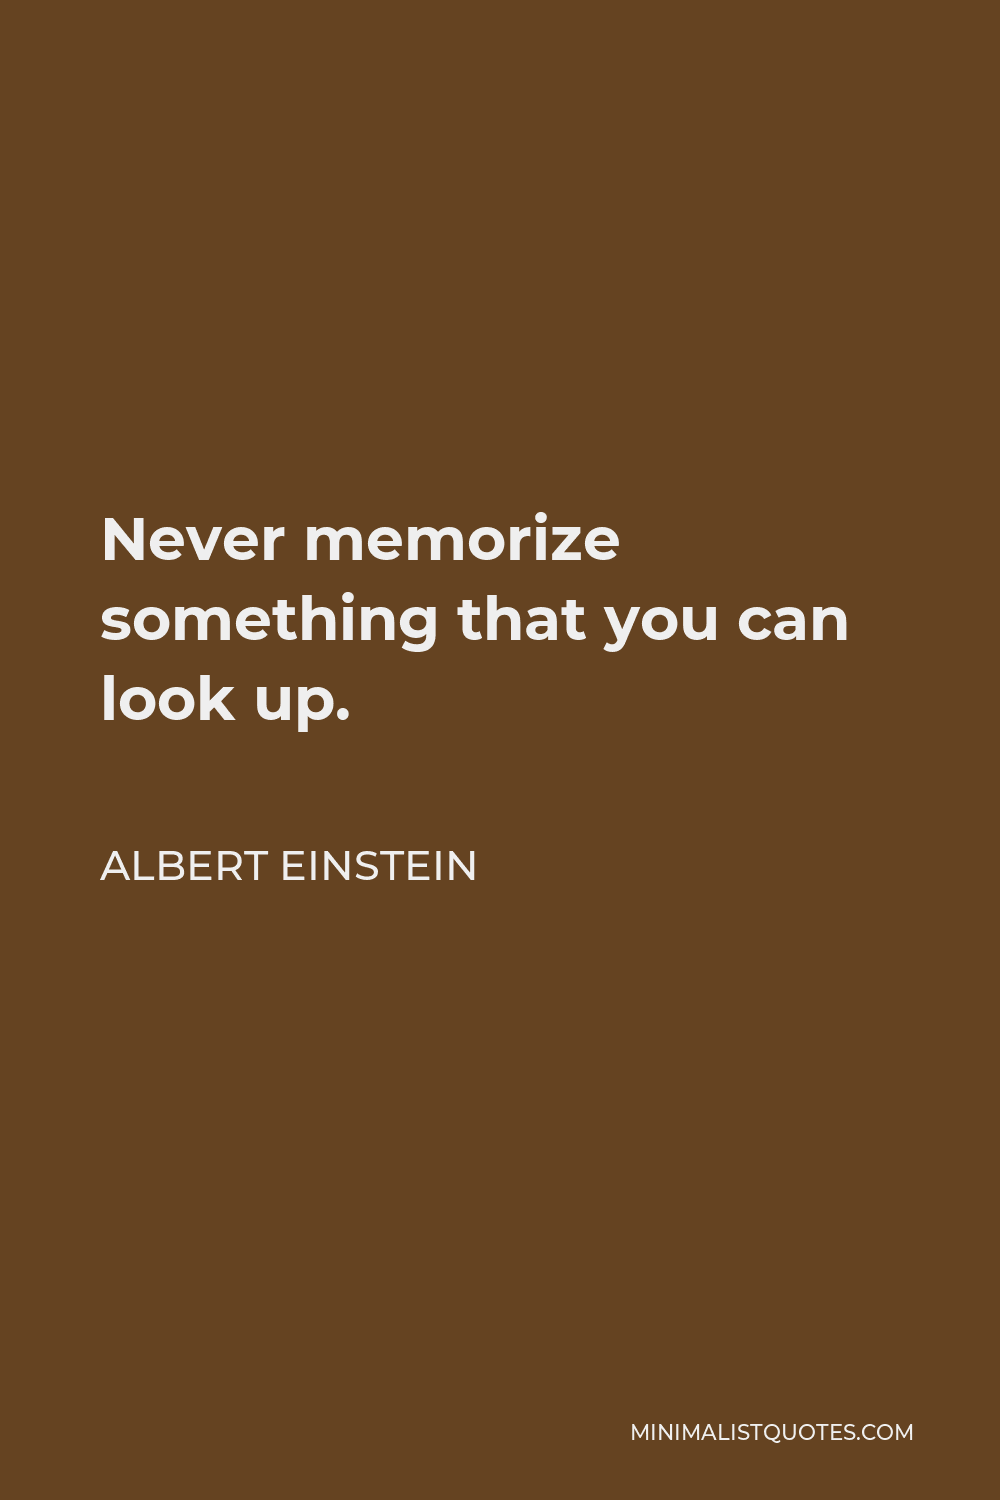 Albert Einstein Quote - Never memorize something that you can look up.